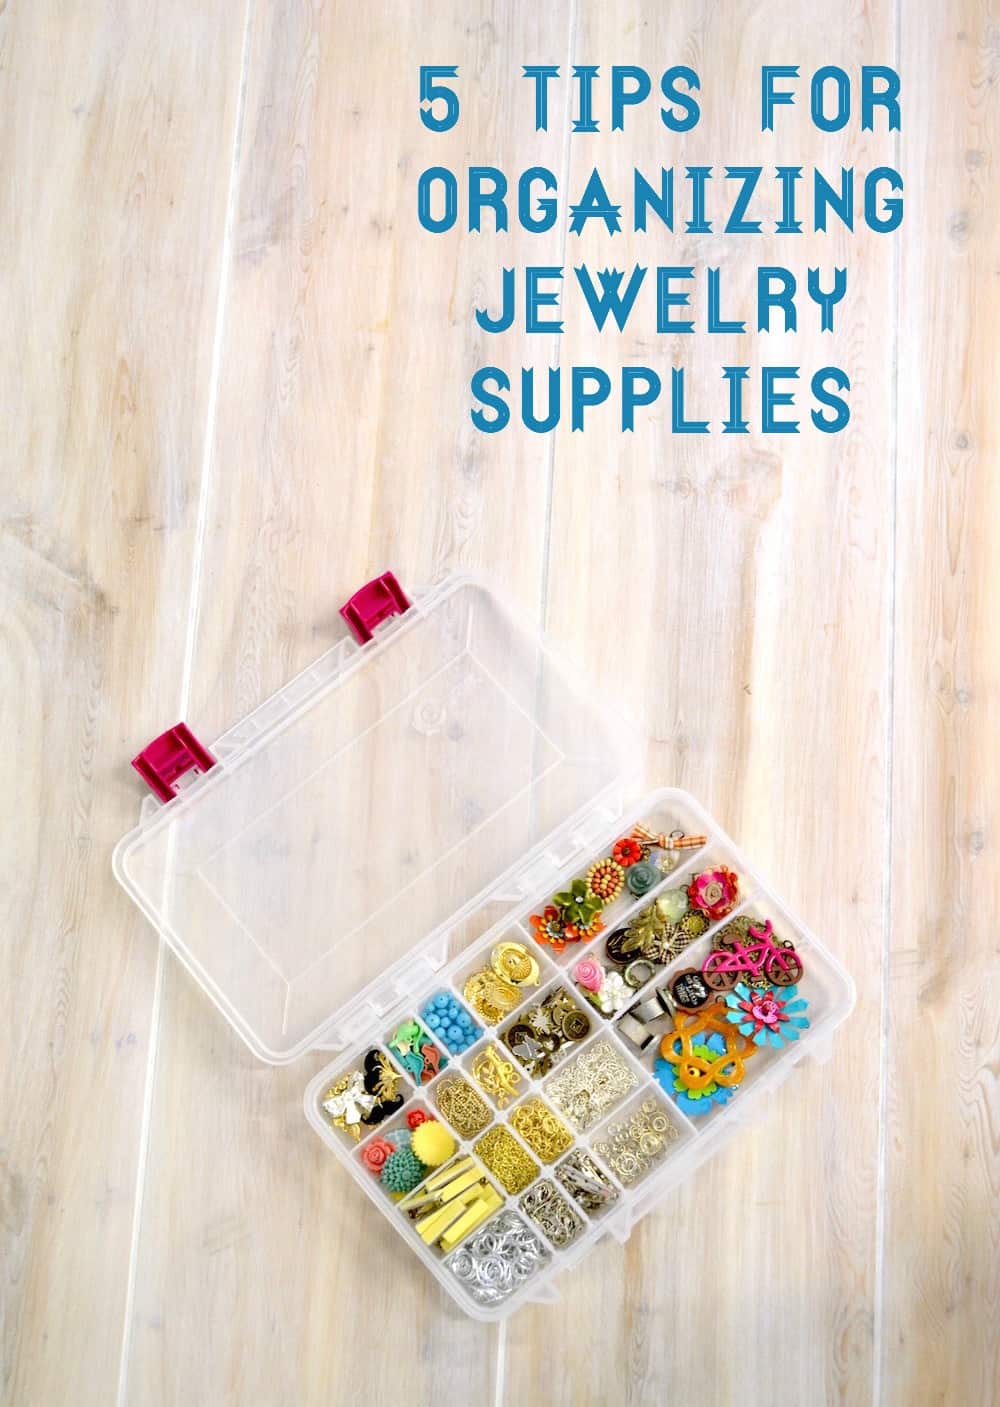 5 Tips for Organizing Jewelry Supplies